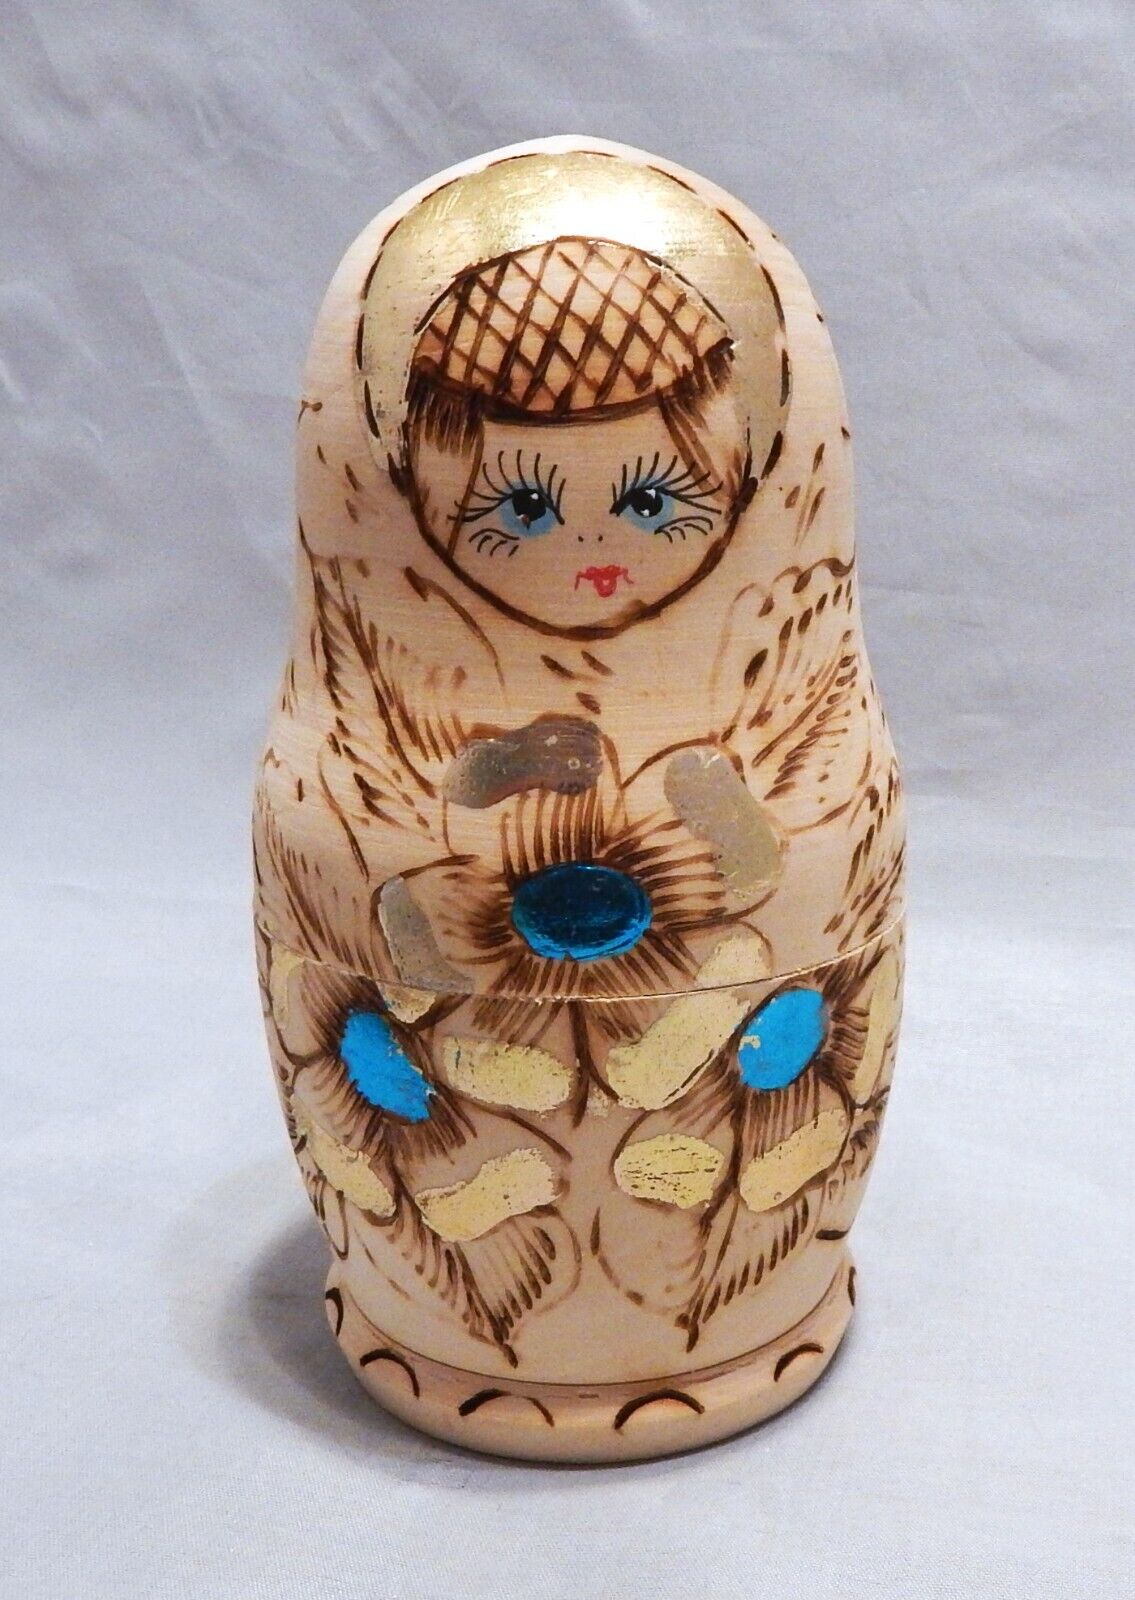 5 Piece Russian Nesting Doll Set Hand Painted